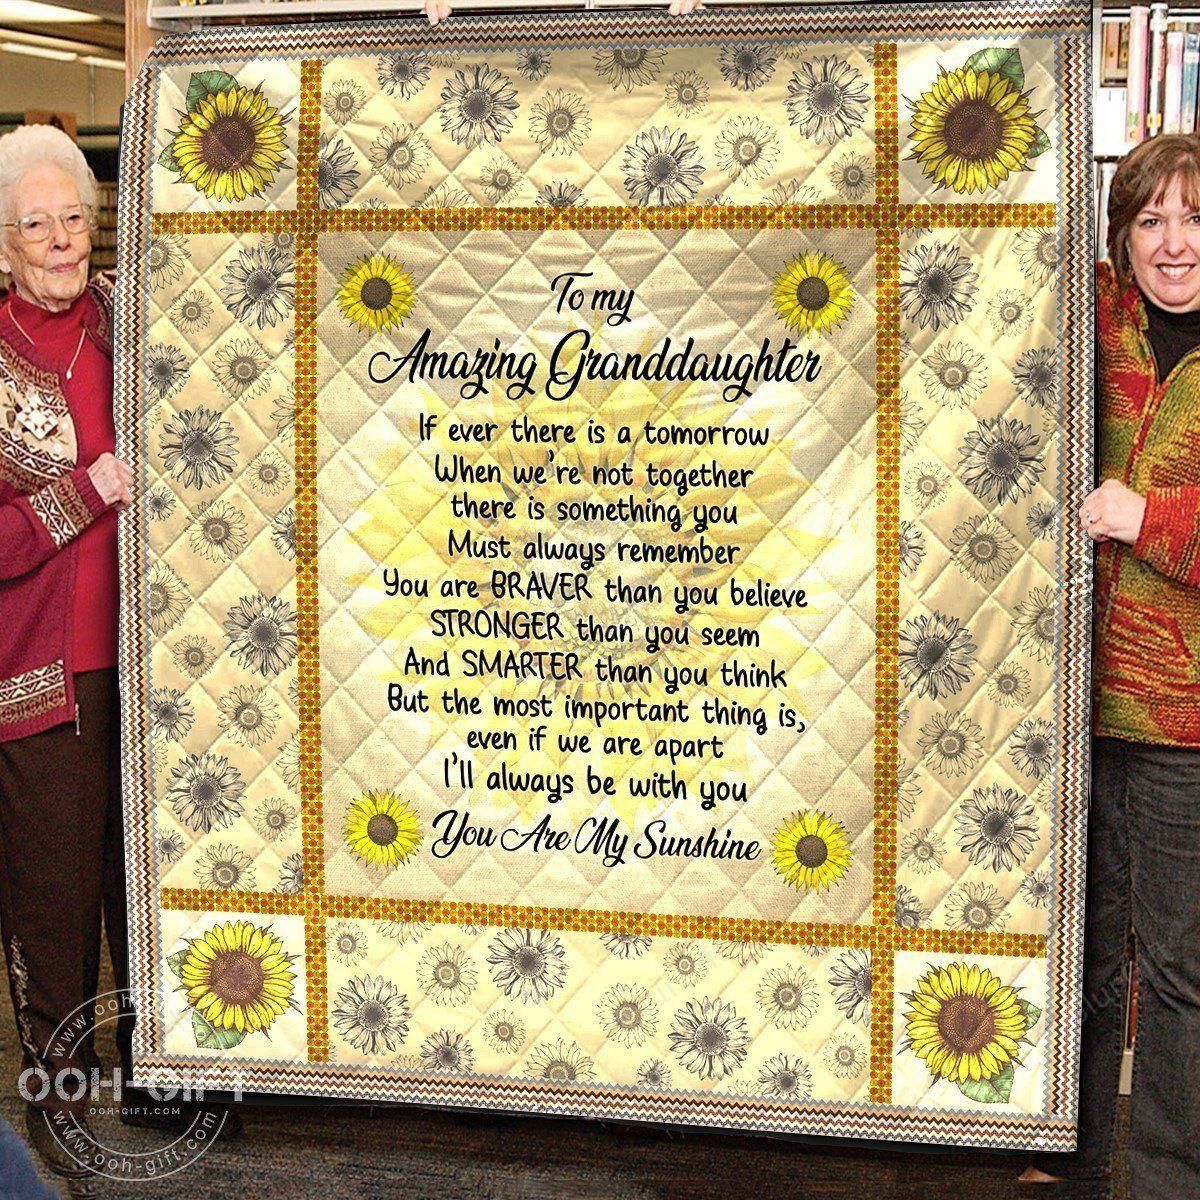 Quilt - Granddaughter - Amazing Granddaughter - I'll always be with you